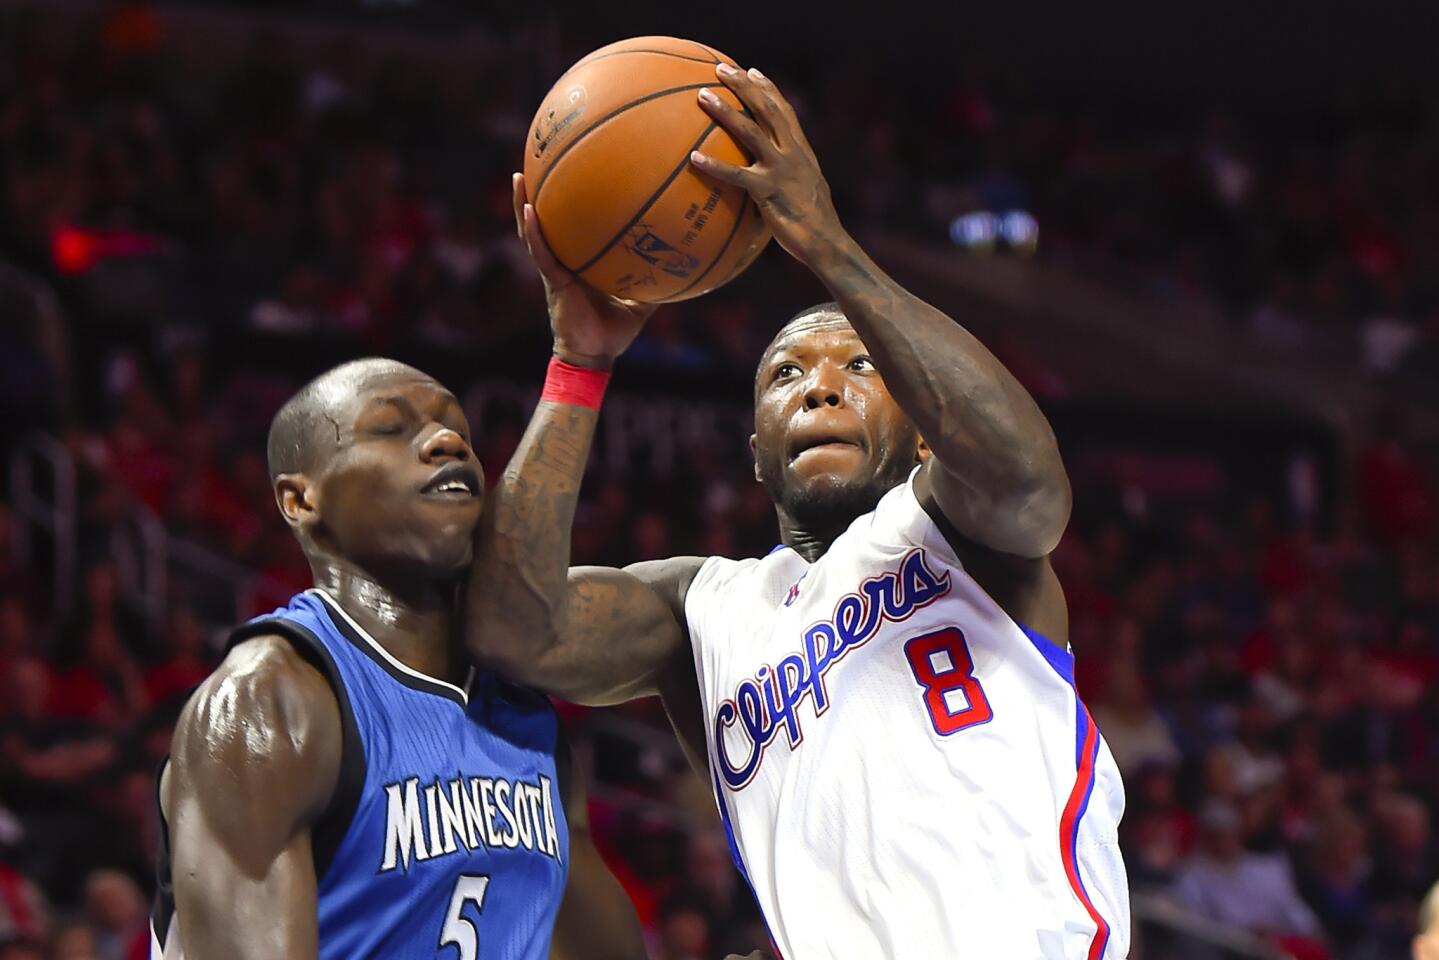 Former Clippers guard Nate Robinson drives past Timberwolves center Gorgui Dieng on March 9, 2015.